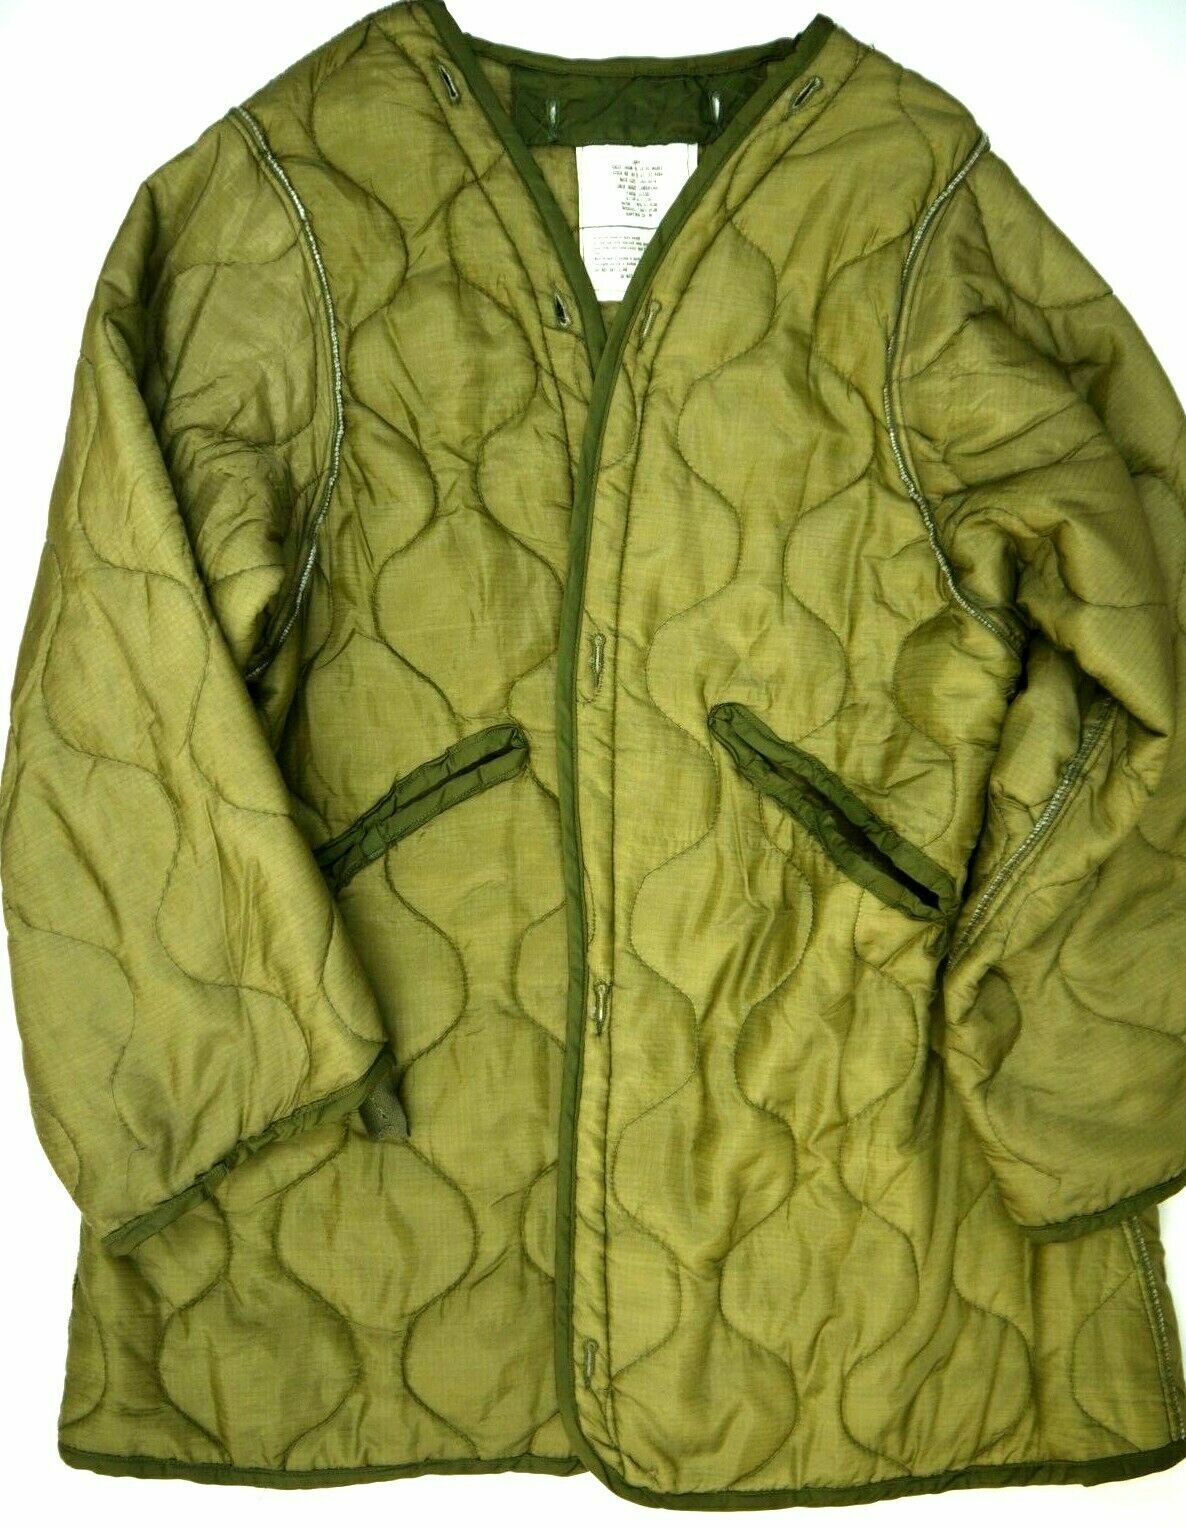 ARMY NIGHT DESERT FISHTAIL PARKA JACKET LINER QUILTED GENUINE GI MILITARY ISSUE